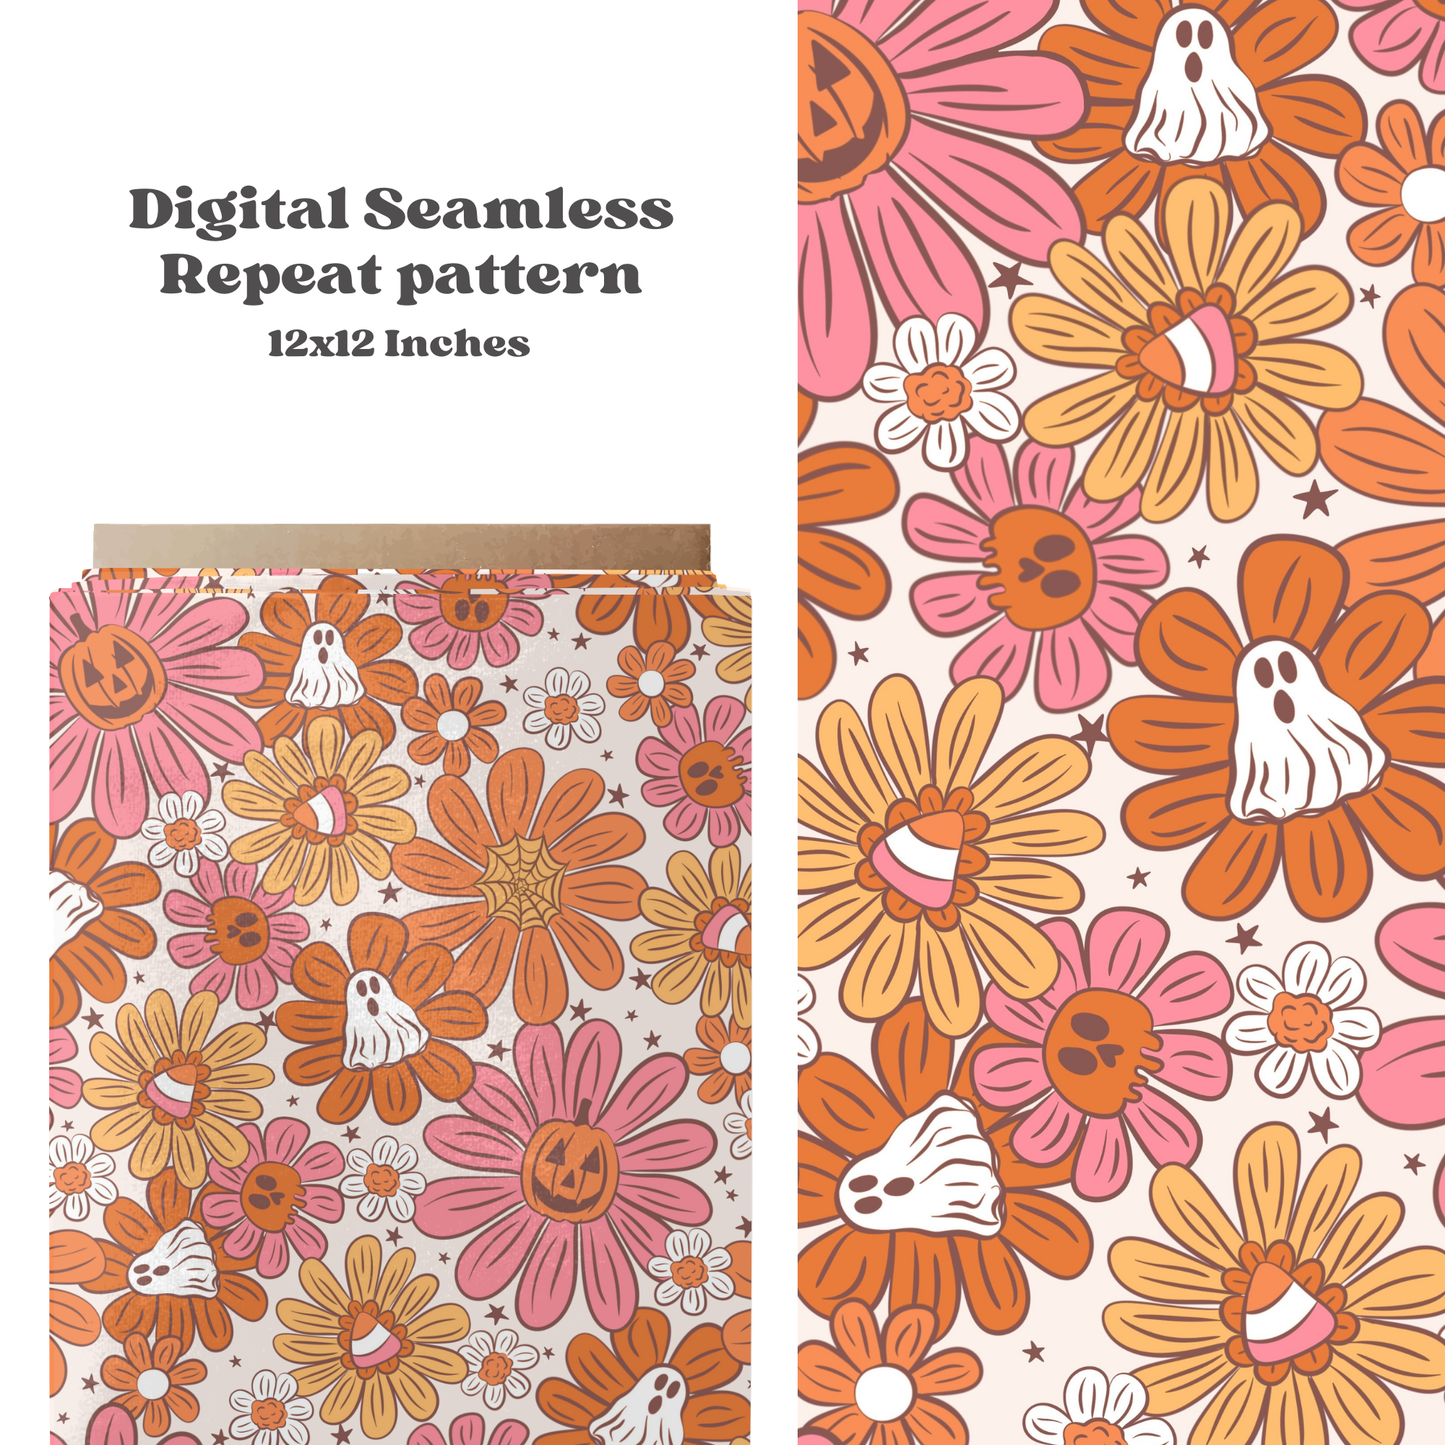 Boho spooky Halloween floral seamless surface pattern